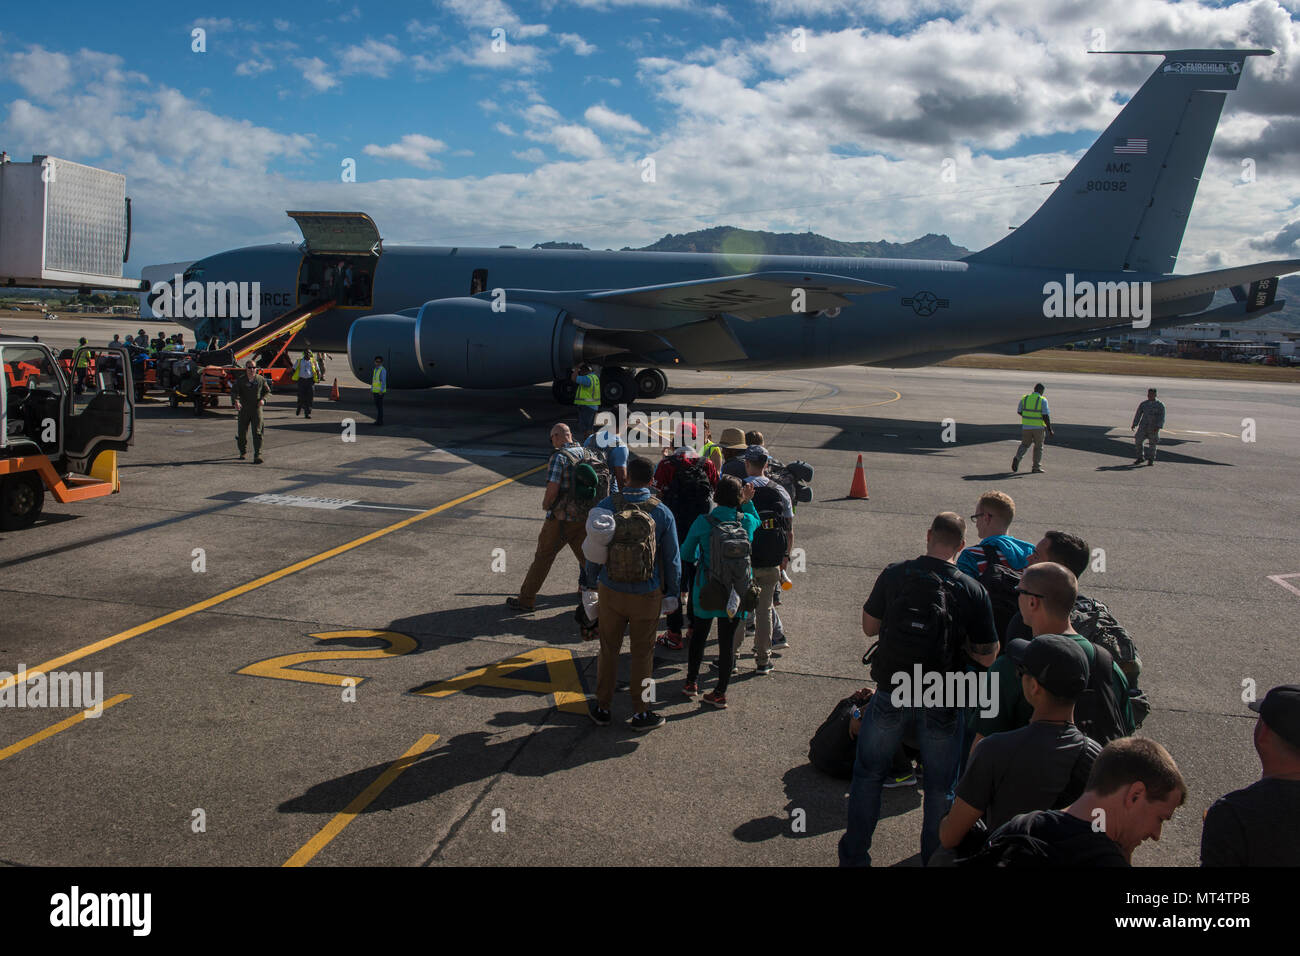 Pacific Angel (PACANGEL) 17-3 main body personnel board a 92nd Air Refueling Wing KC-135 Stratotanker from Fairchild Air Force Base, Wash., for their return flight home at the Nadi International Airport in Fiji, July 25, 2017. The active duty KC-135, flown by a crew completely comprised of Washington Air National Guard Citizen Airmen, provided the primary means of air transportation for PACANGEL 17-3 mission personnel, cargo and supplies. The KC-135 and its crew ensured the operation could execute by sustained rapid global mobility and continuous regional development through mobility partnersh Stock Photo